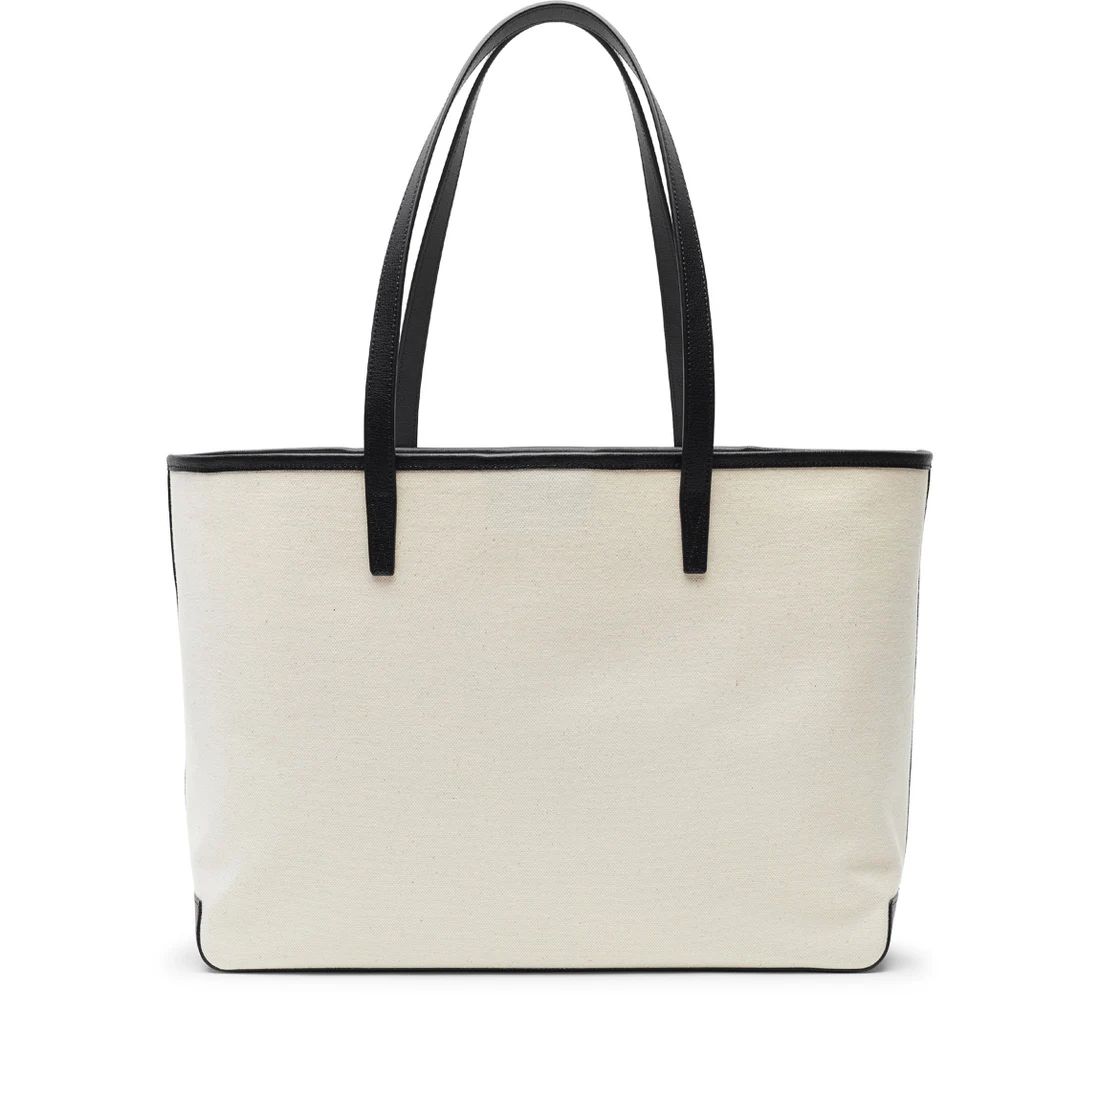 Belmont Structured Totes | Full Grain Leather or Organic Cotton Canvas | Leatherology